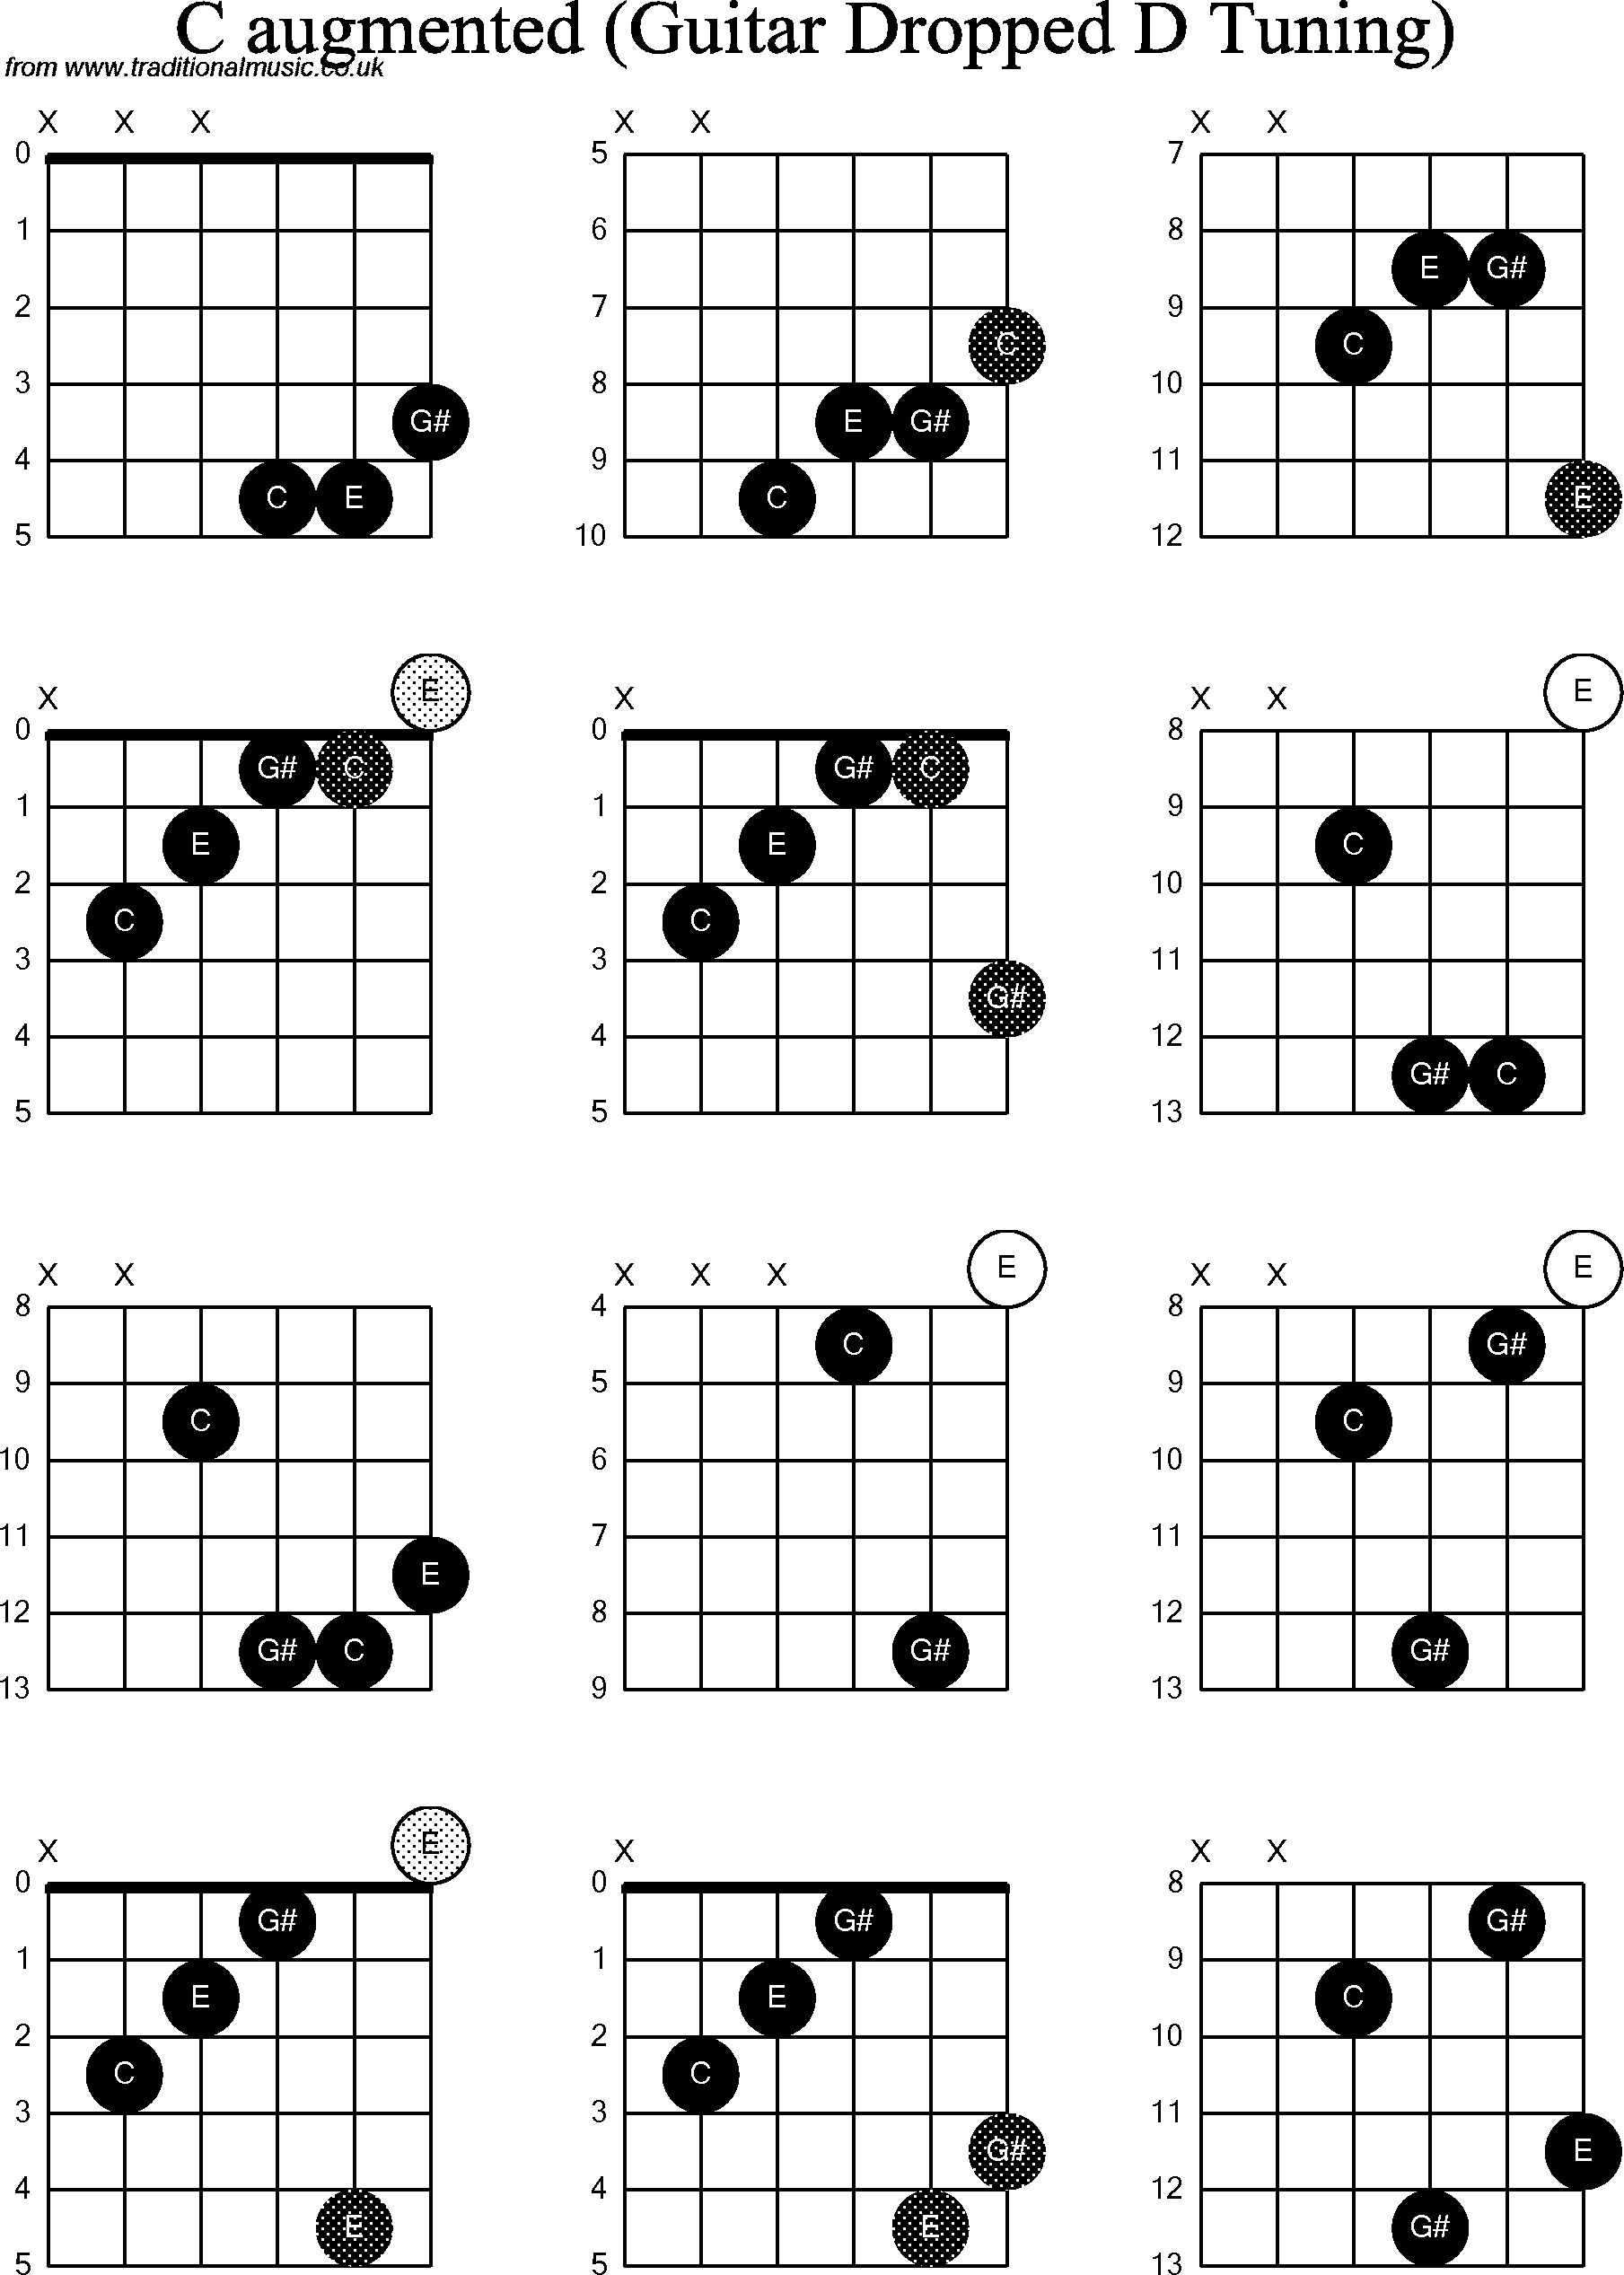 Chord diagrams for dropped D Guitar(DADGBE), C Augmented